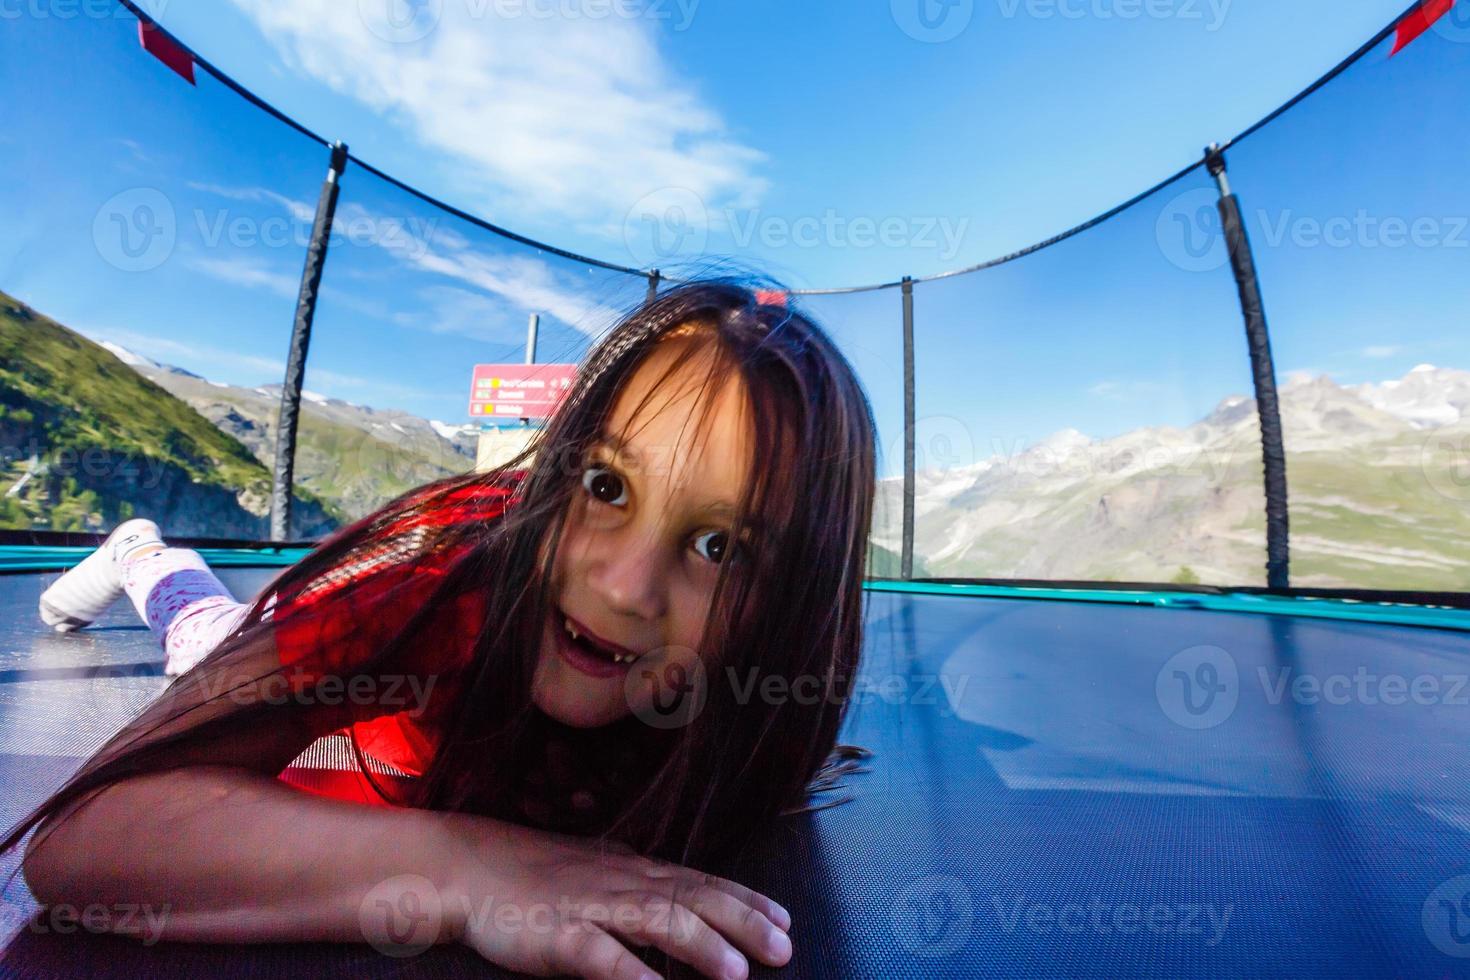 Little girl plays on the playground on the beautiful landscape background in the mountains photo